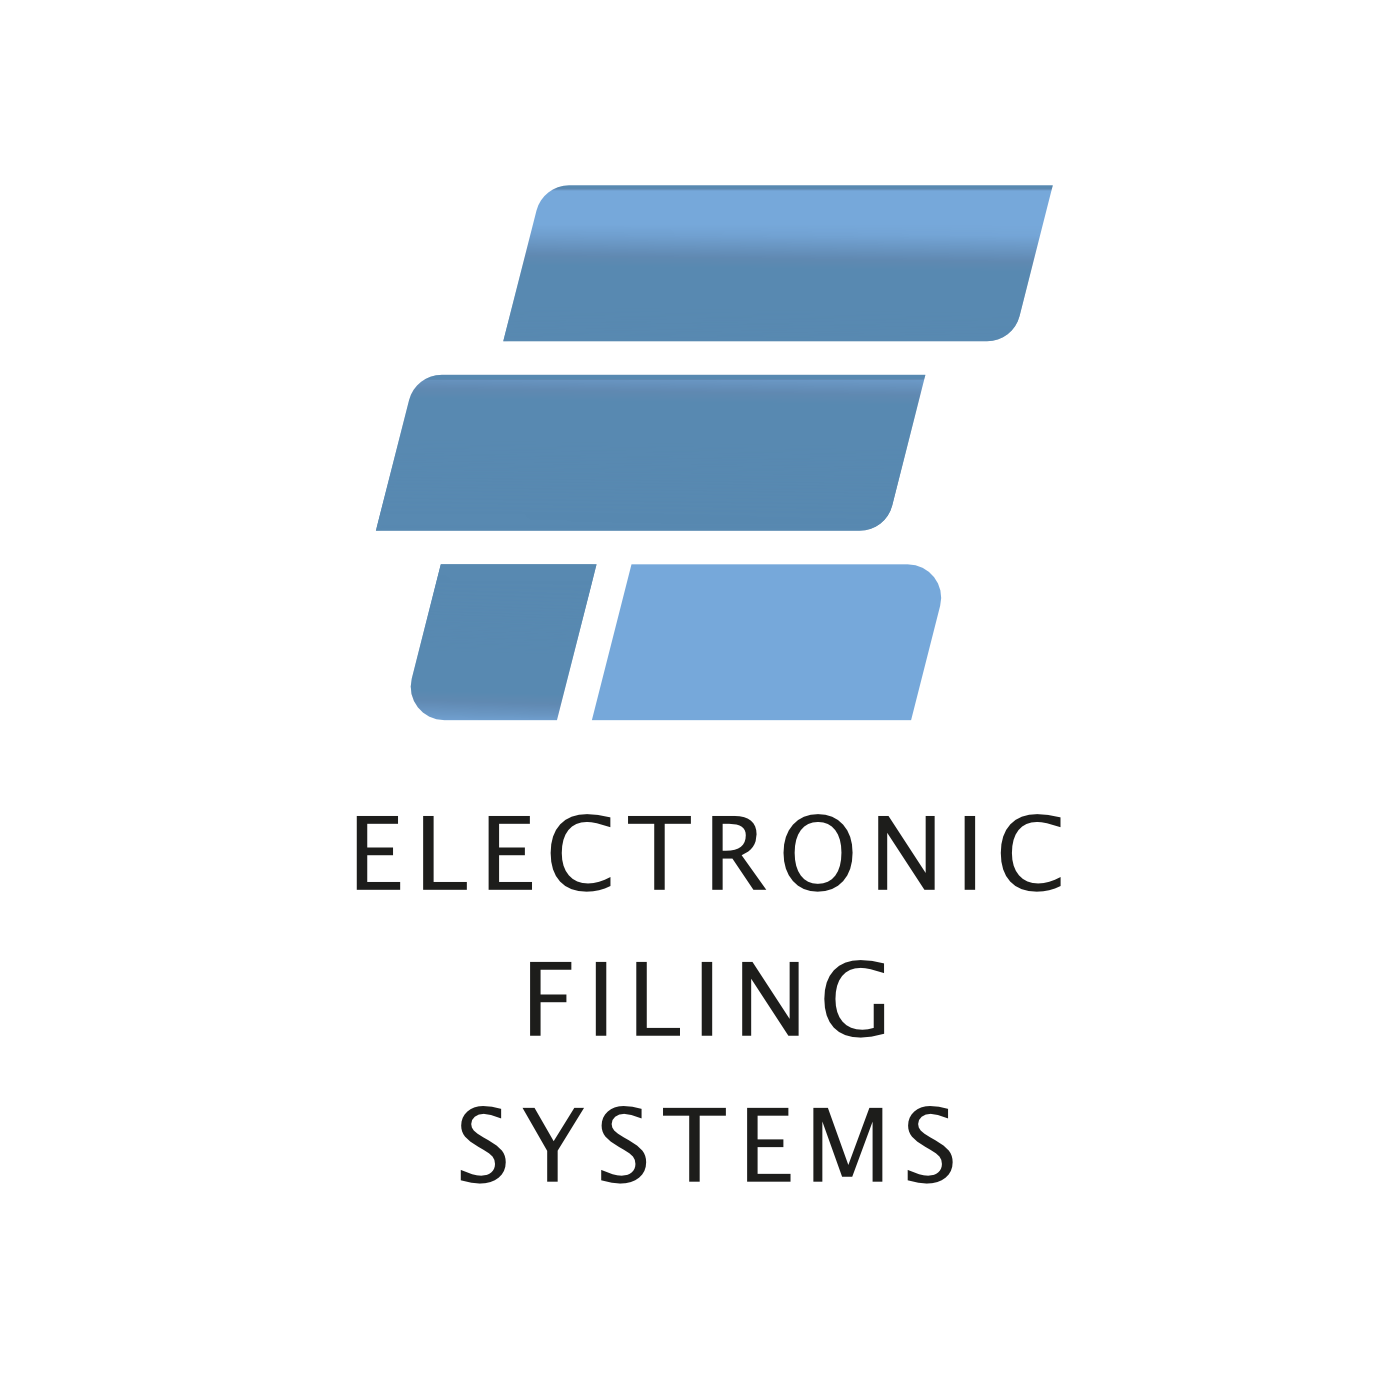 Electronic Filing Systems